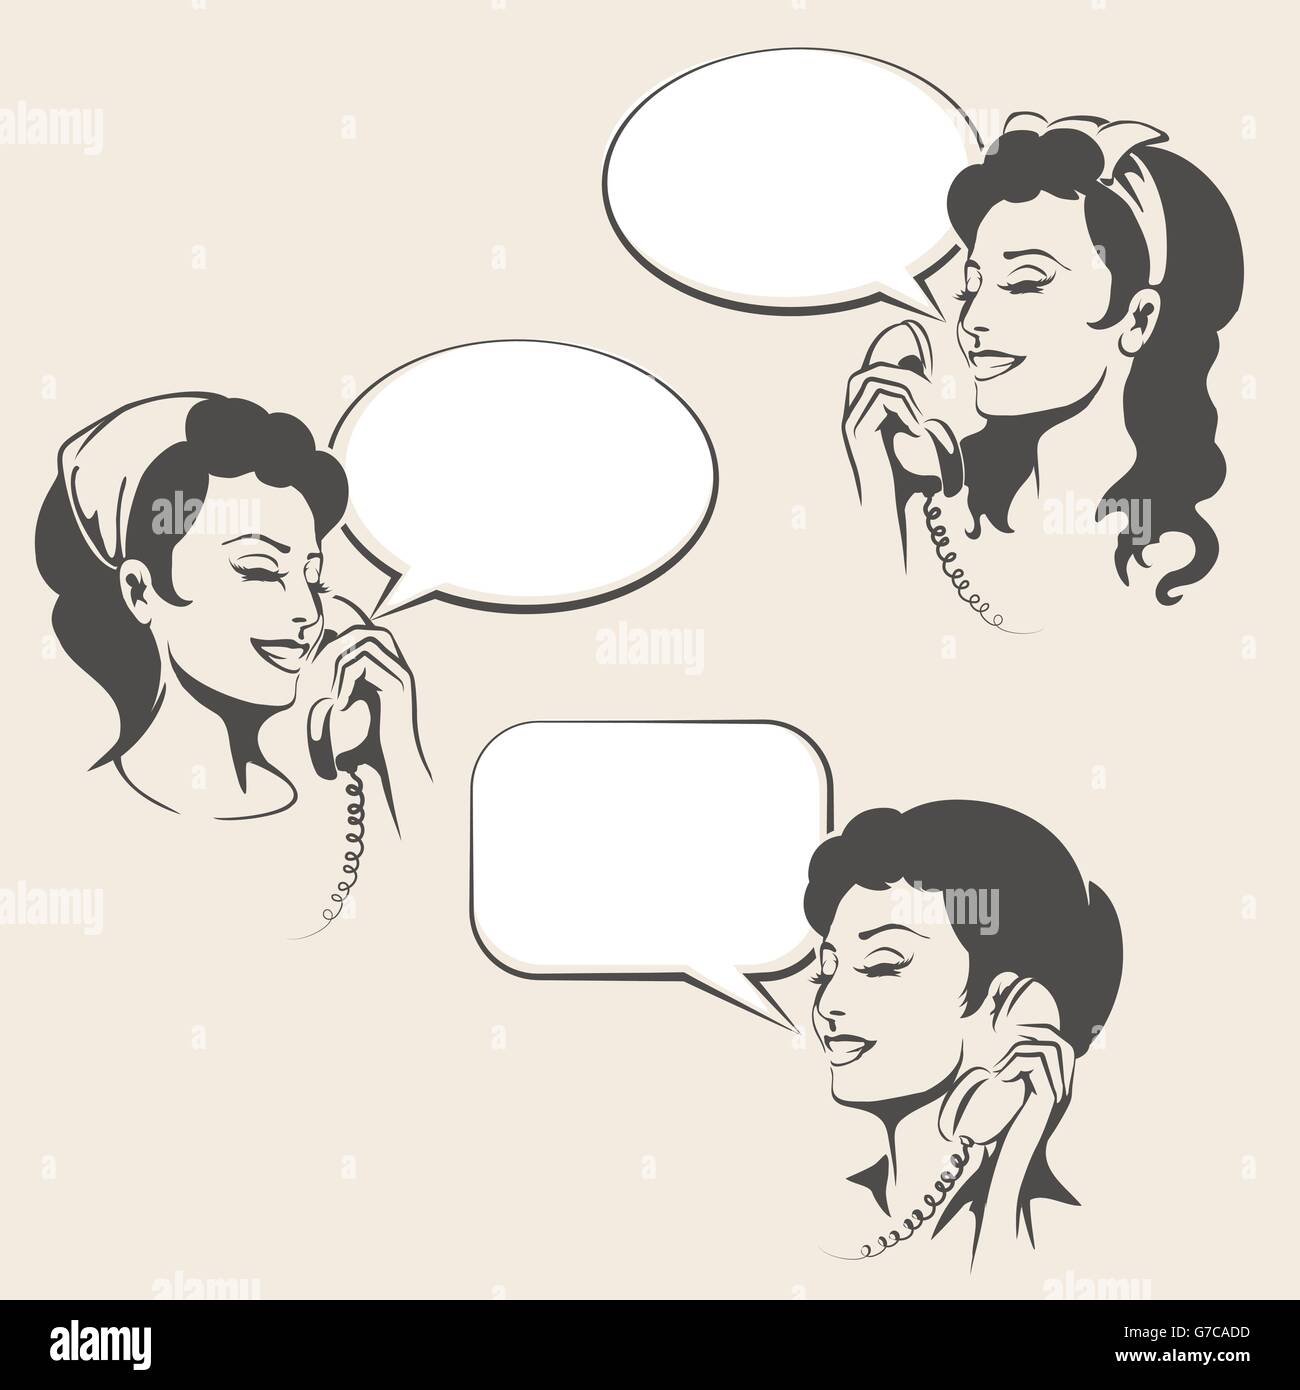 Set of Women talking on a phone with empty speech bubbles. Illustration in retro style. Stock Vector